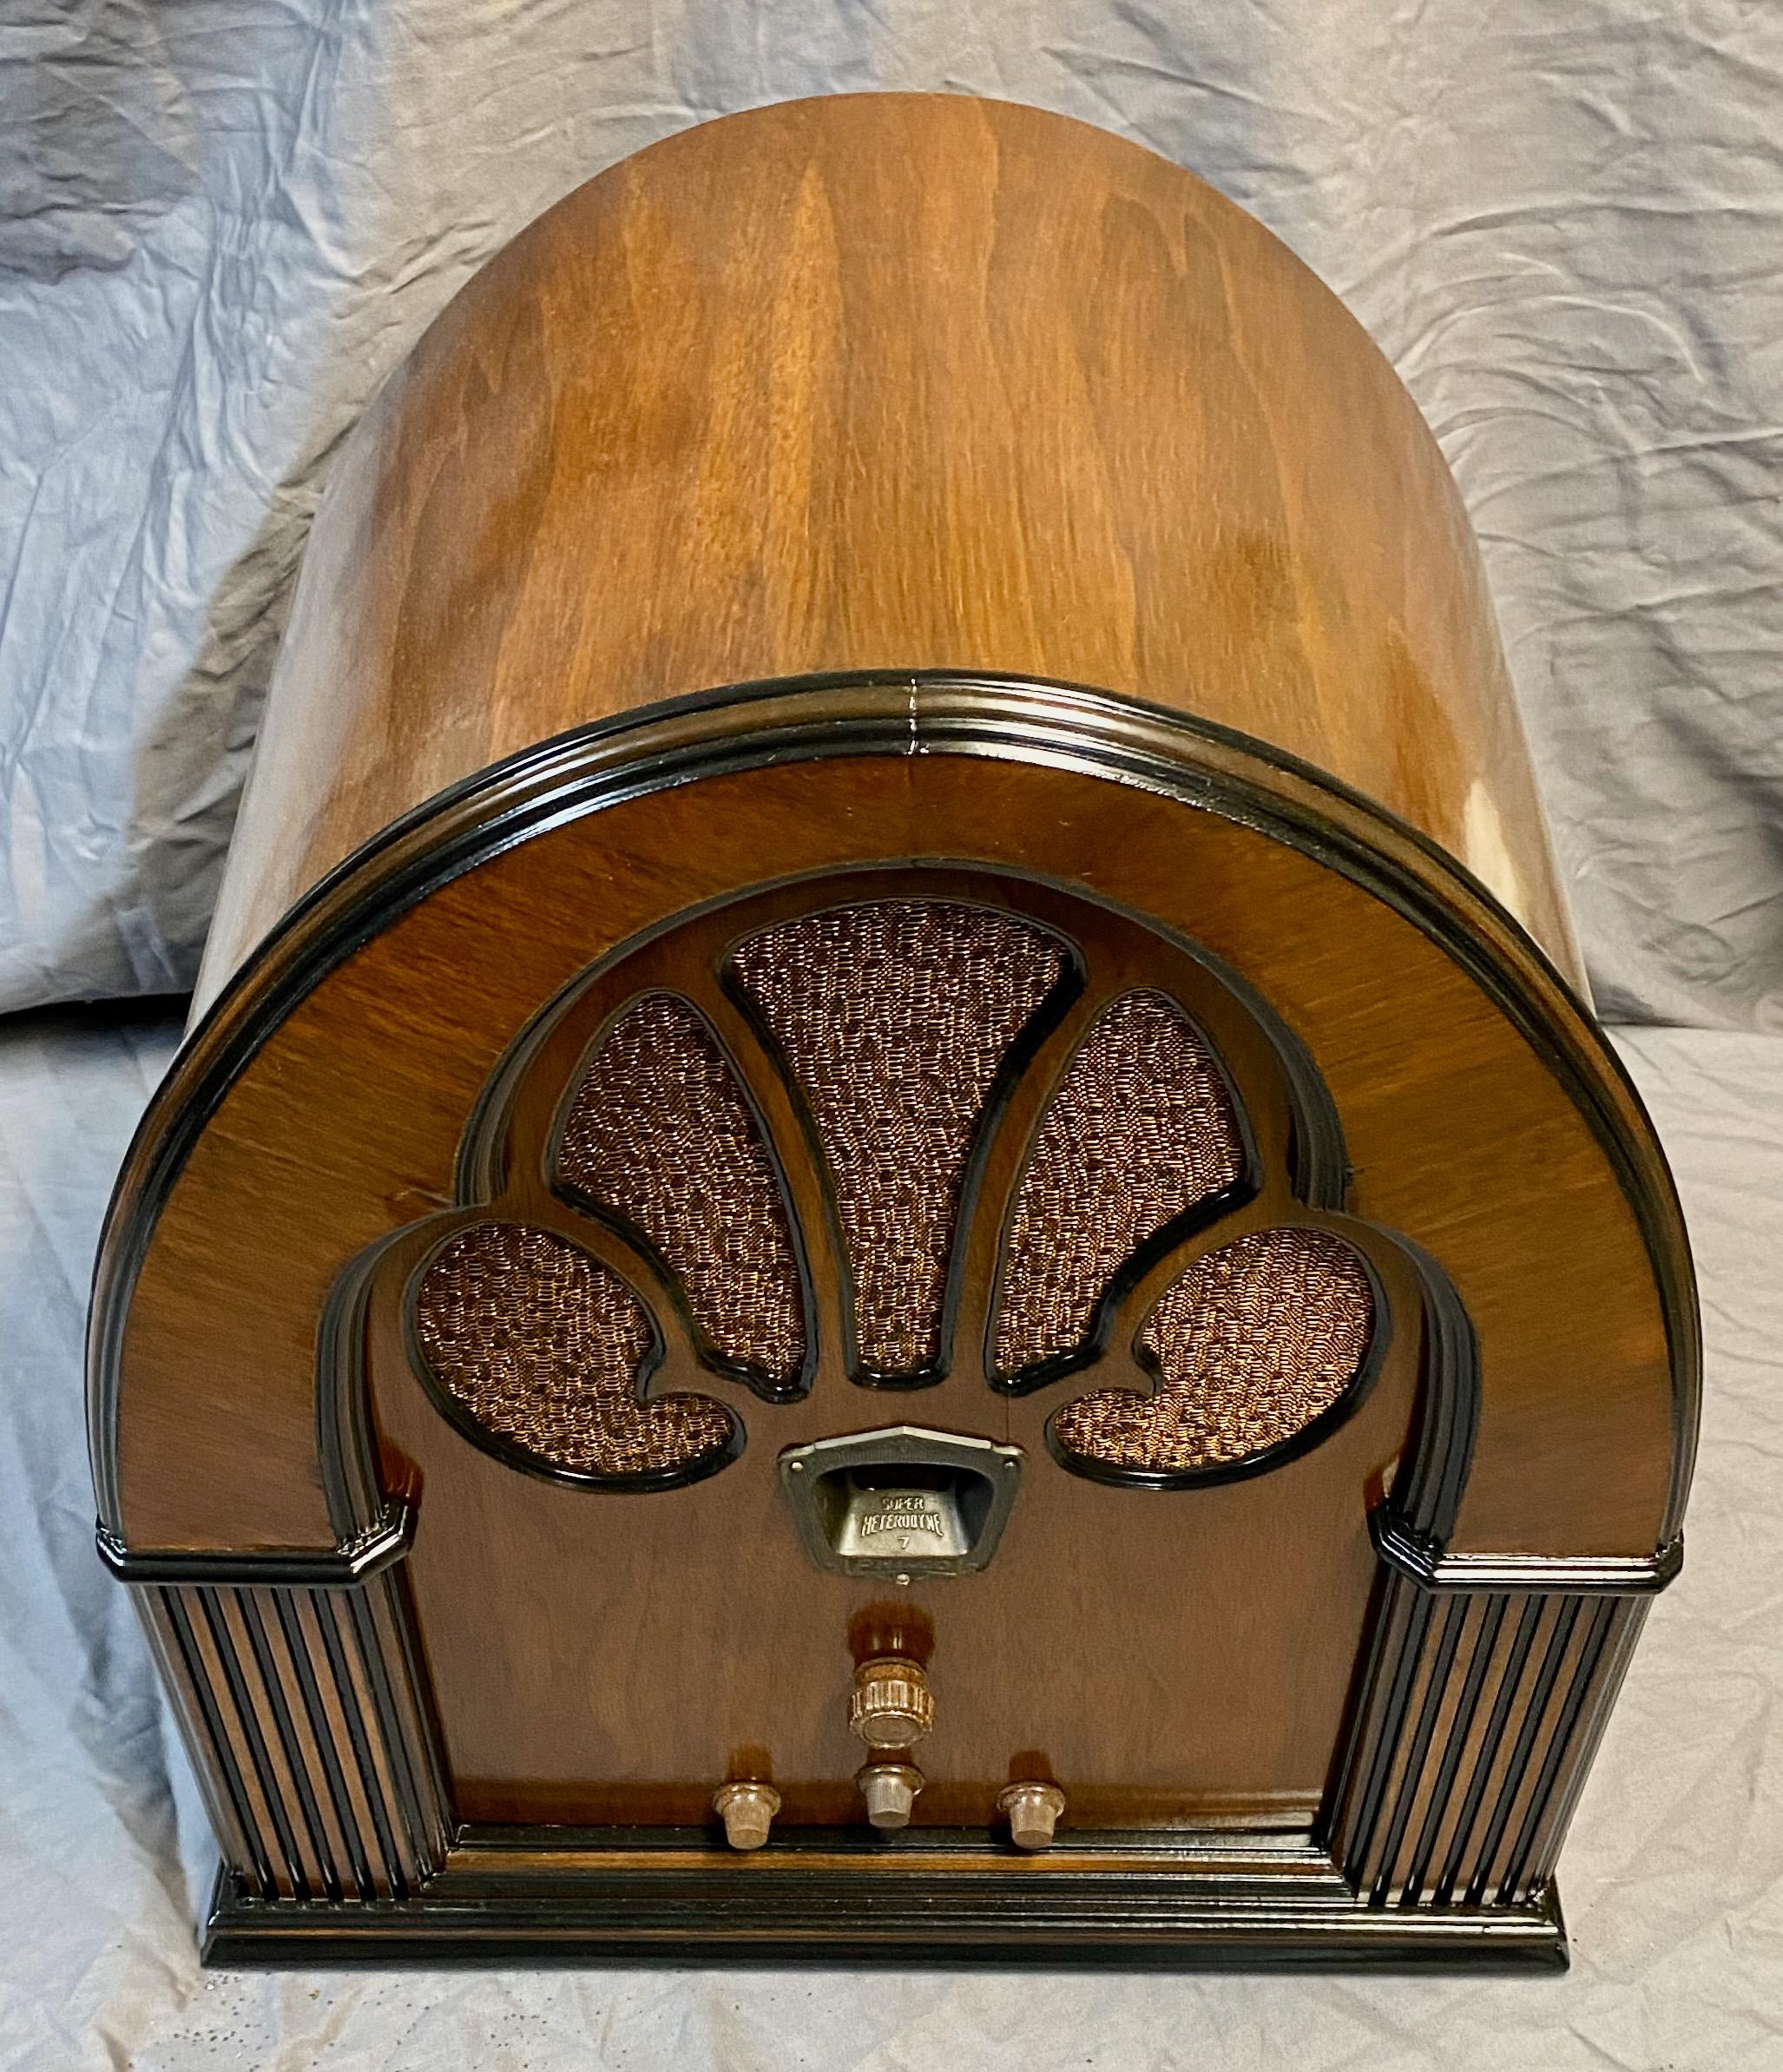 Philco Cathedral radio model 70 is a beauty. Designed by Edward Combs, the “70? was the next to the top of the line. It employed Philco’s 7-tube balanced super-heterodyne chassis. The radio had the very latest technology and has been completely